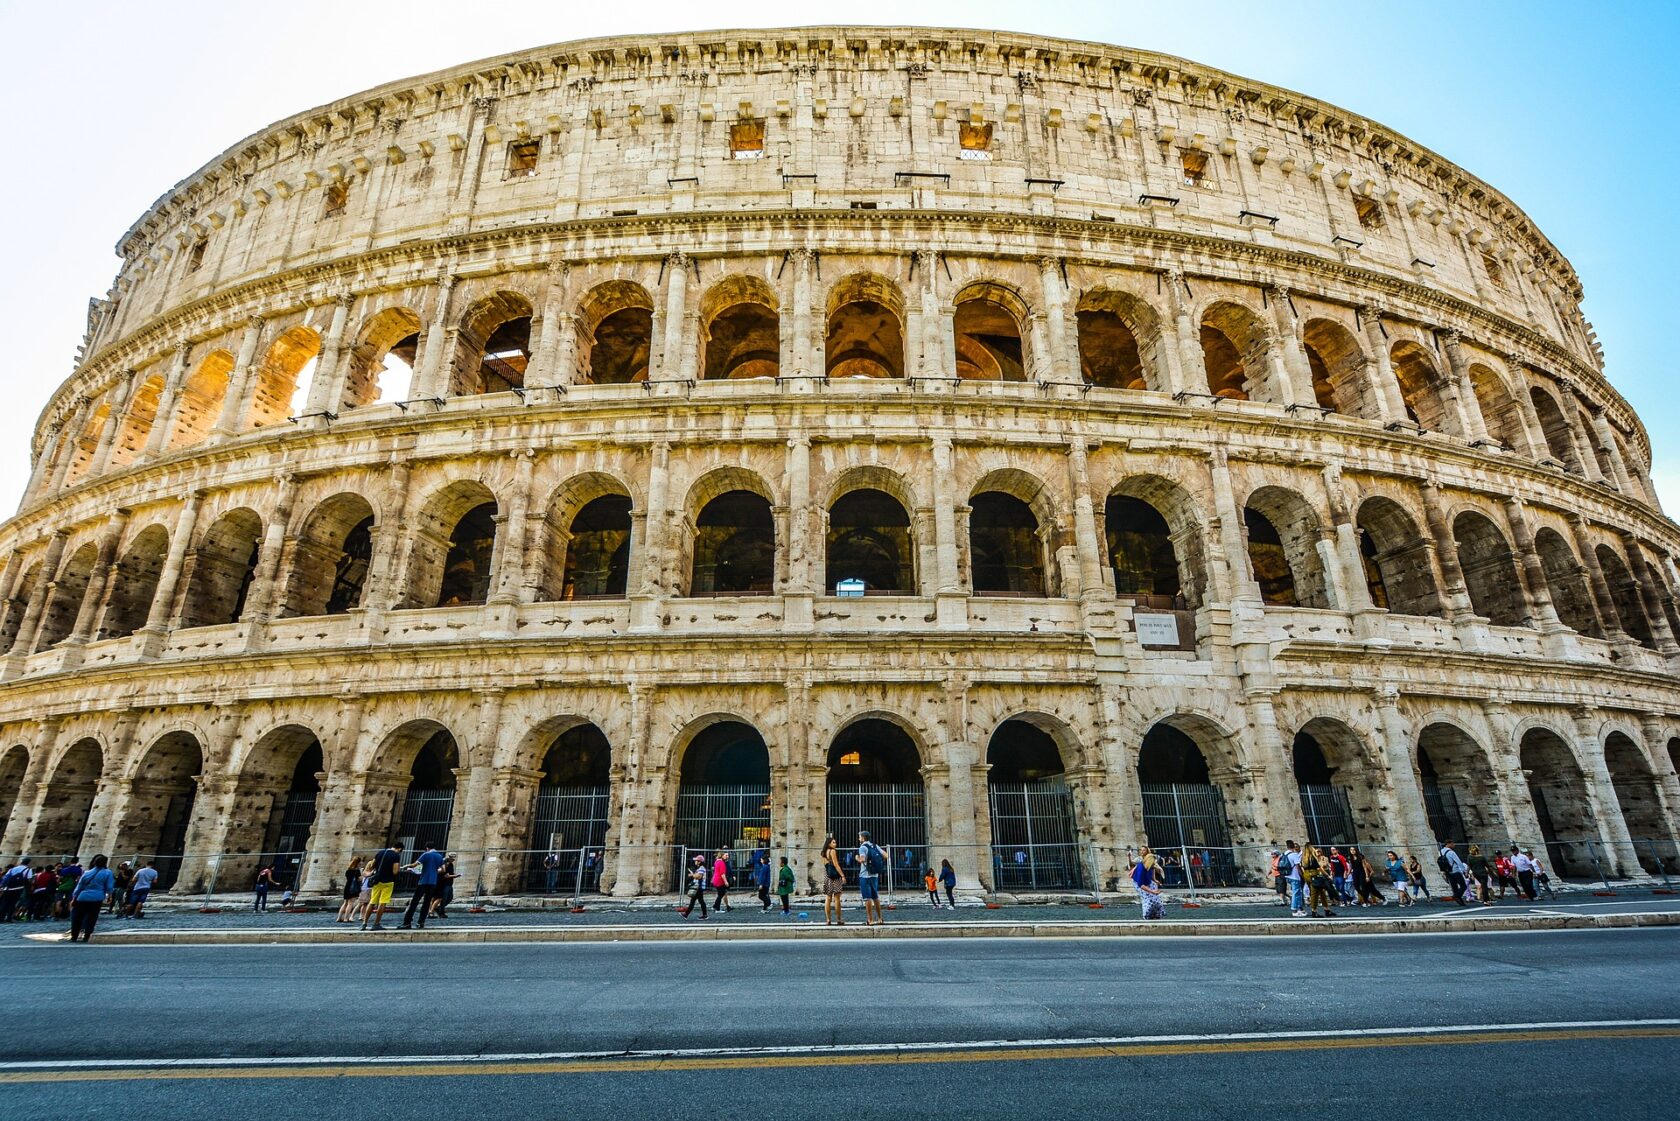 A view of the Colosseum in Rome, Italy (an Atlantis site).